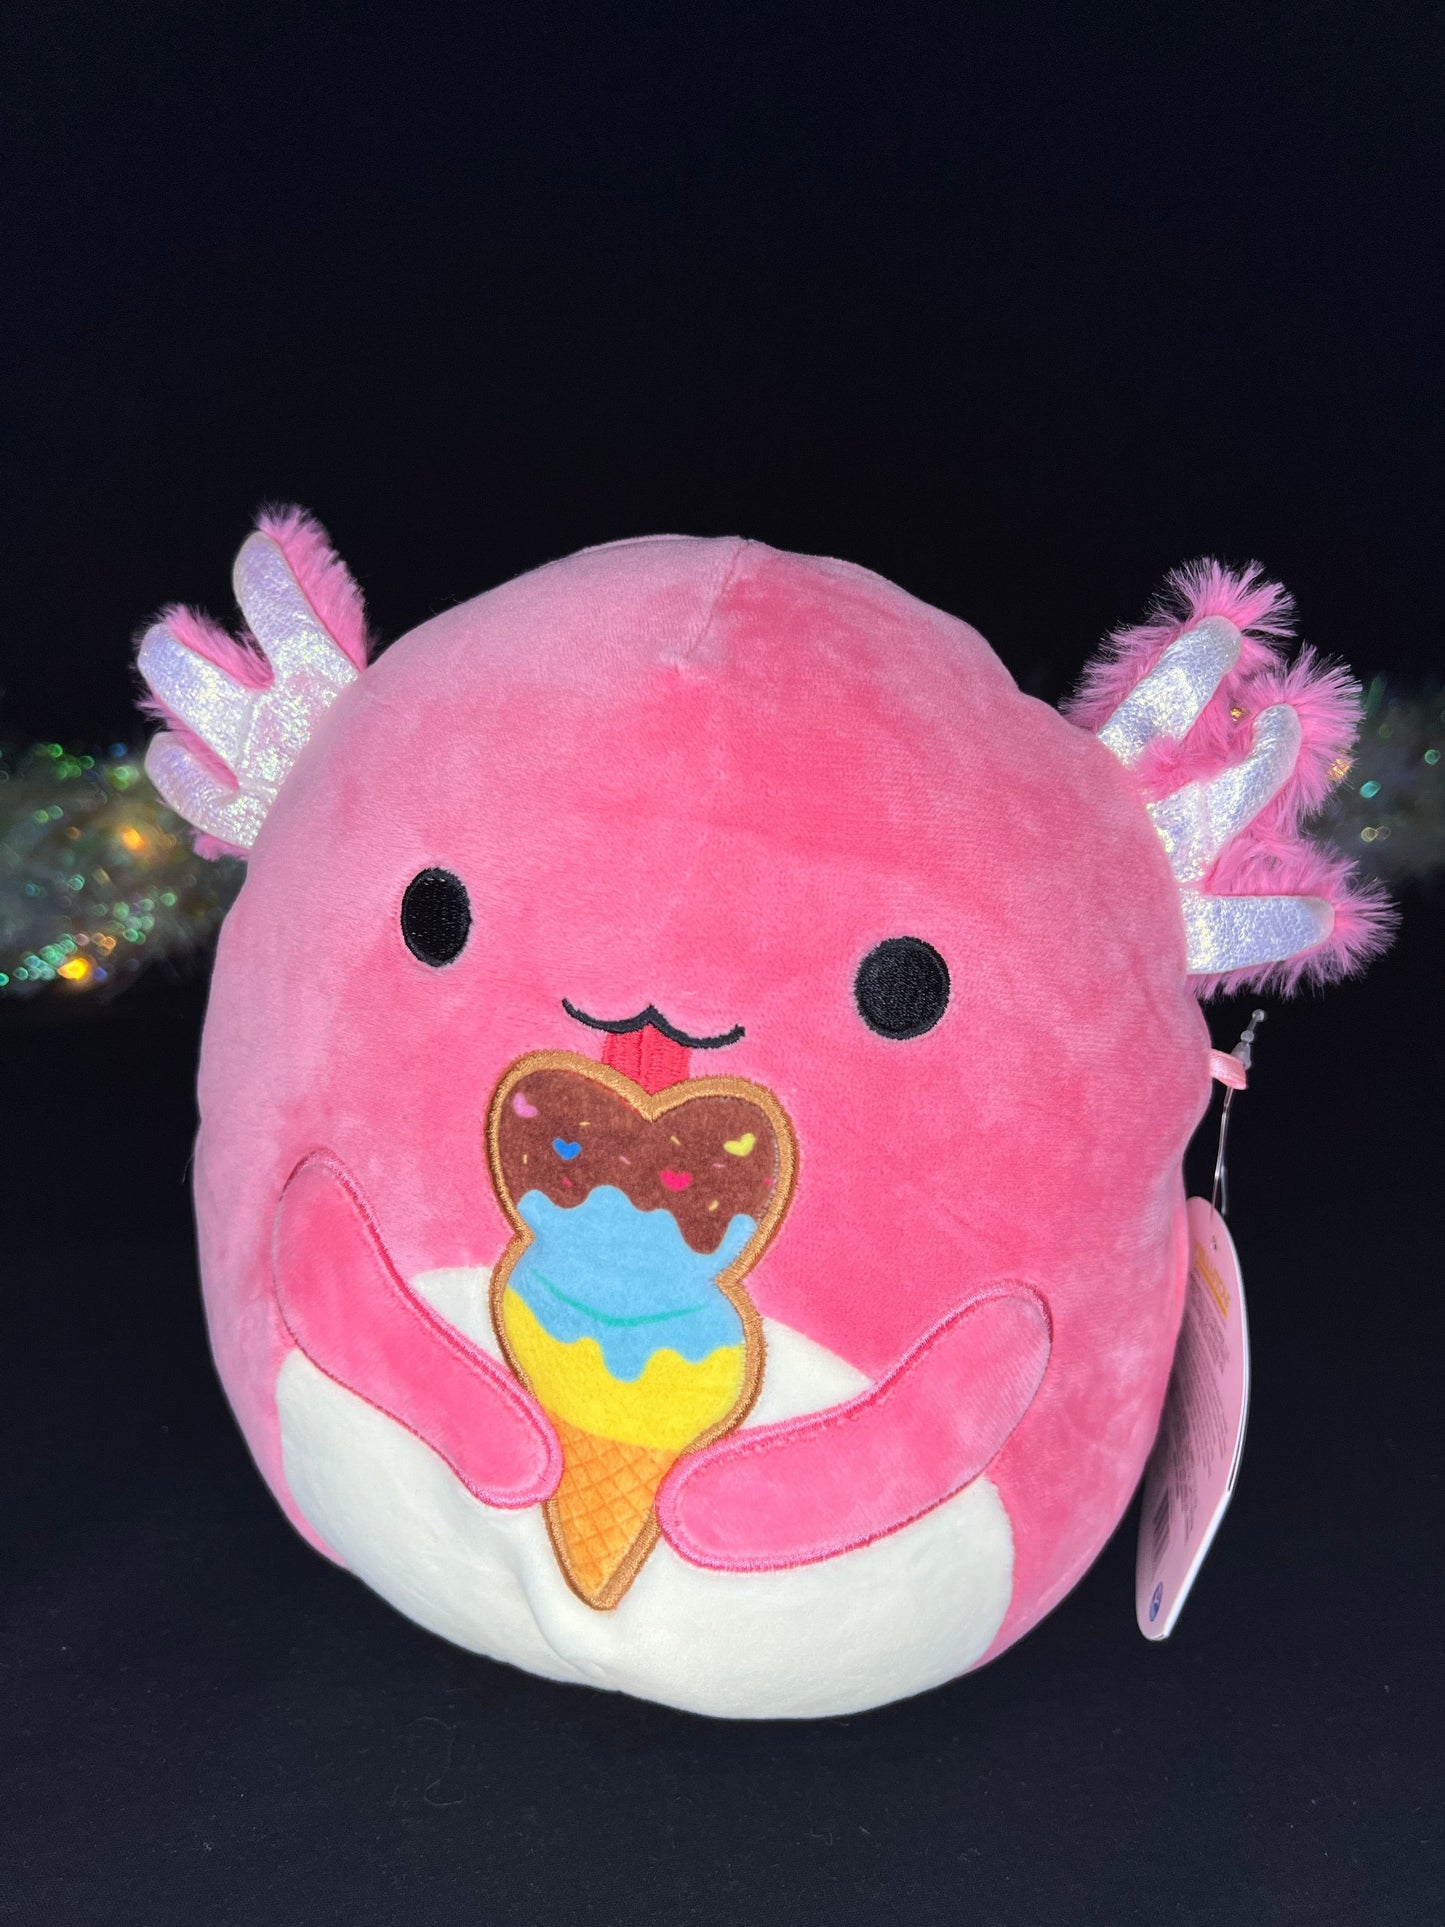 Squishmallow 8” Archie the Axolotl with Ice Cream | Sweet Magnolia Charms.